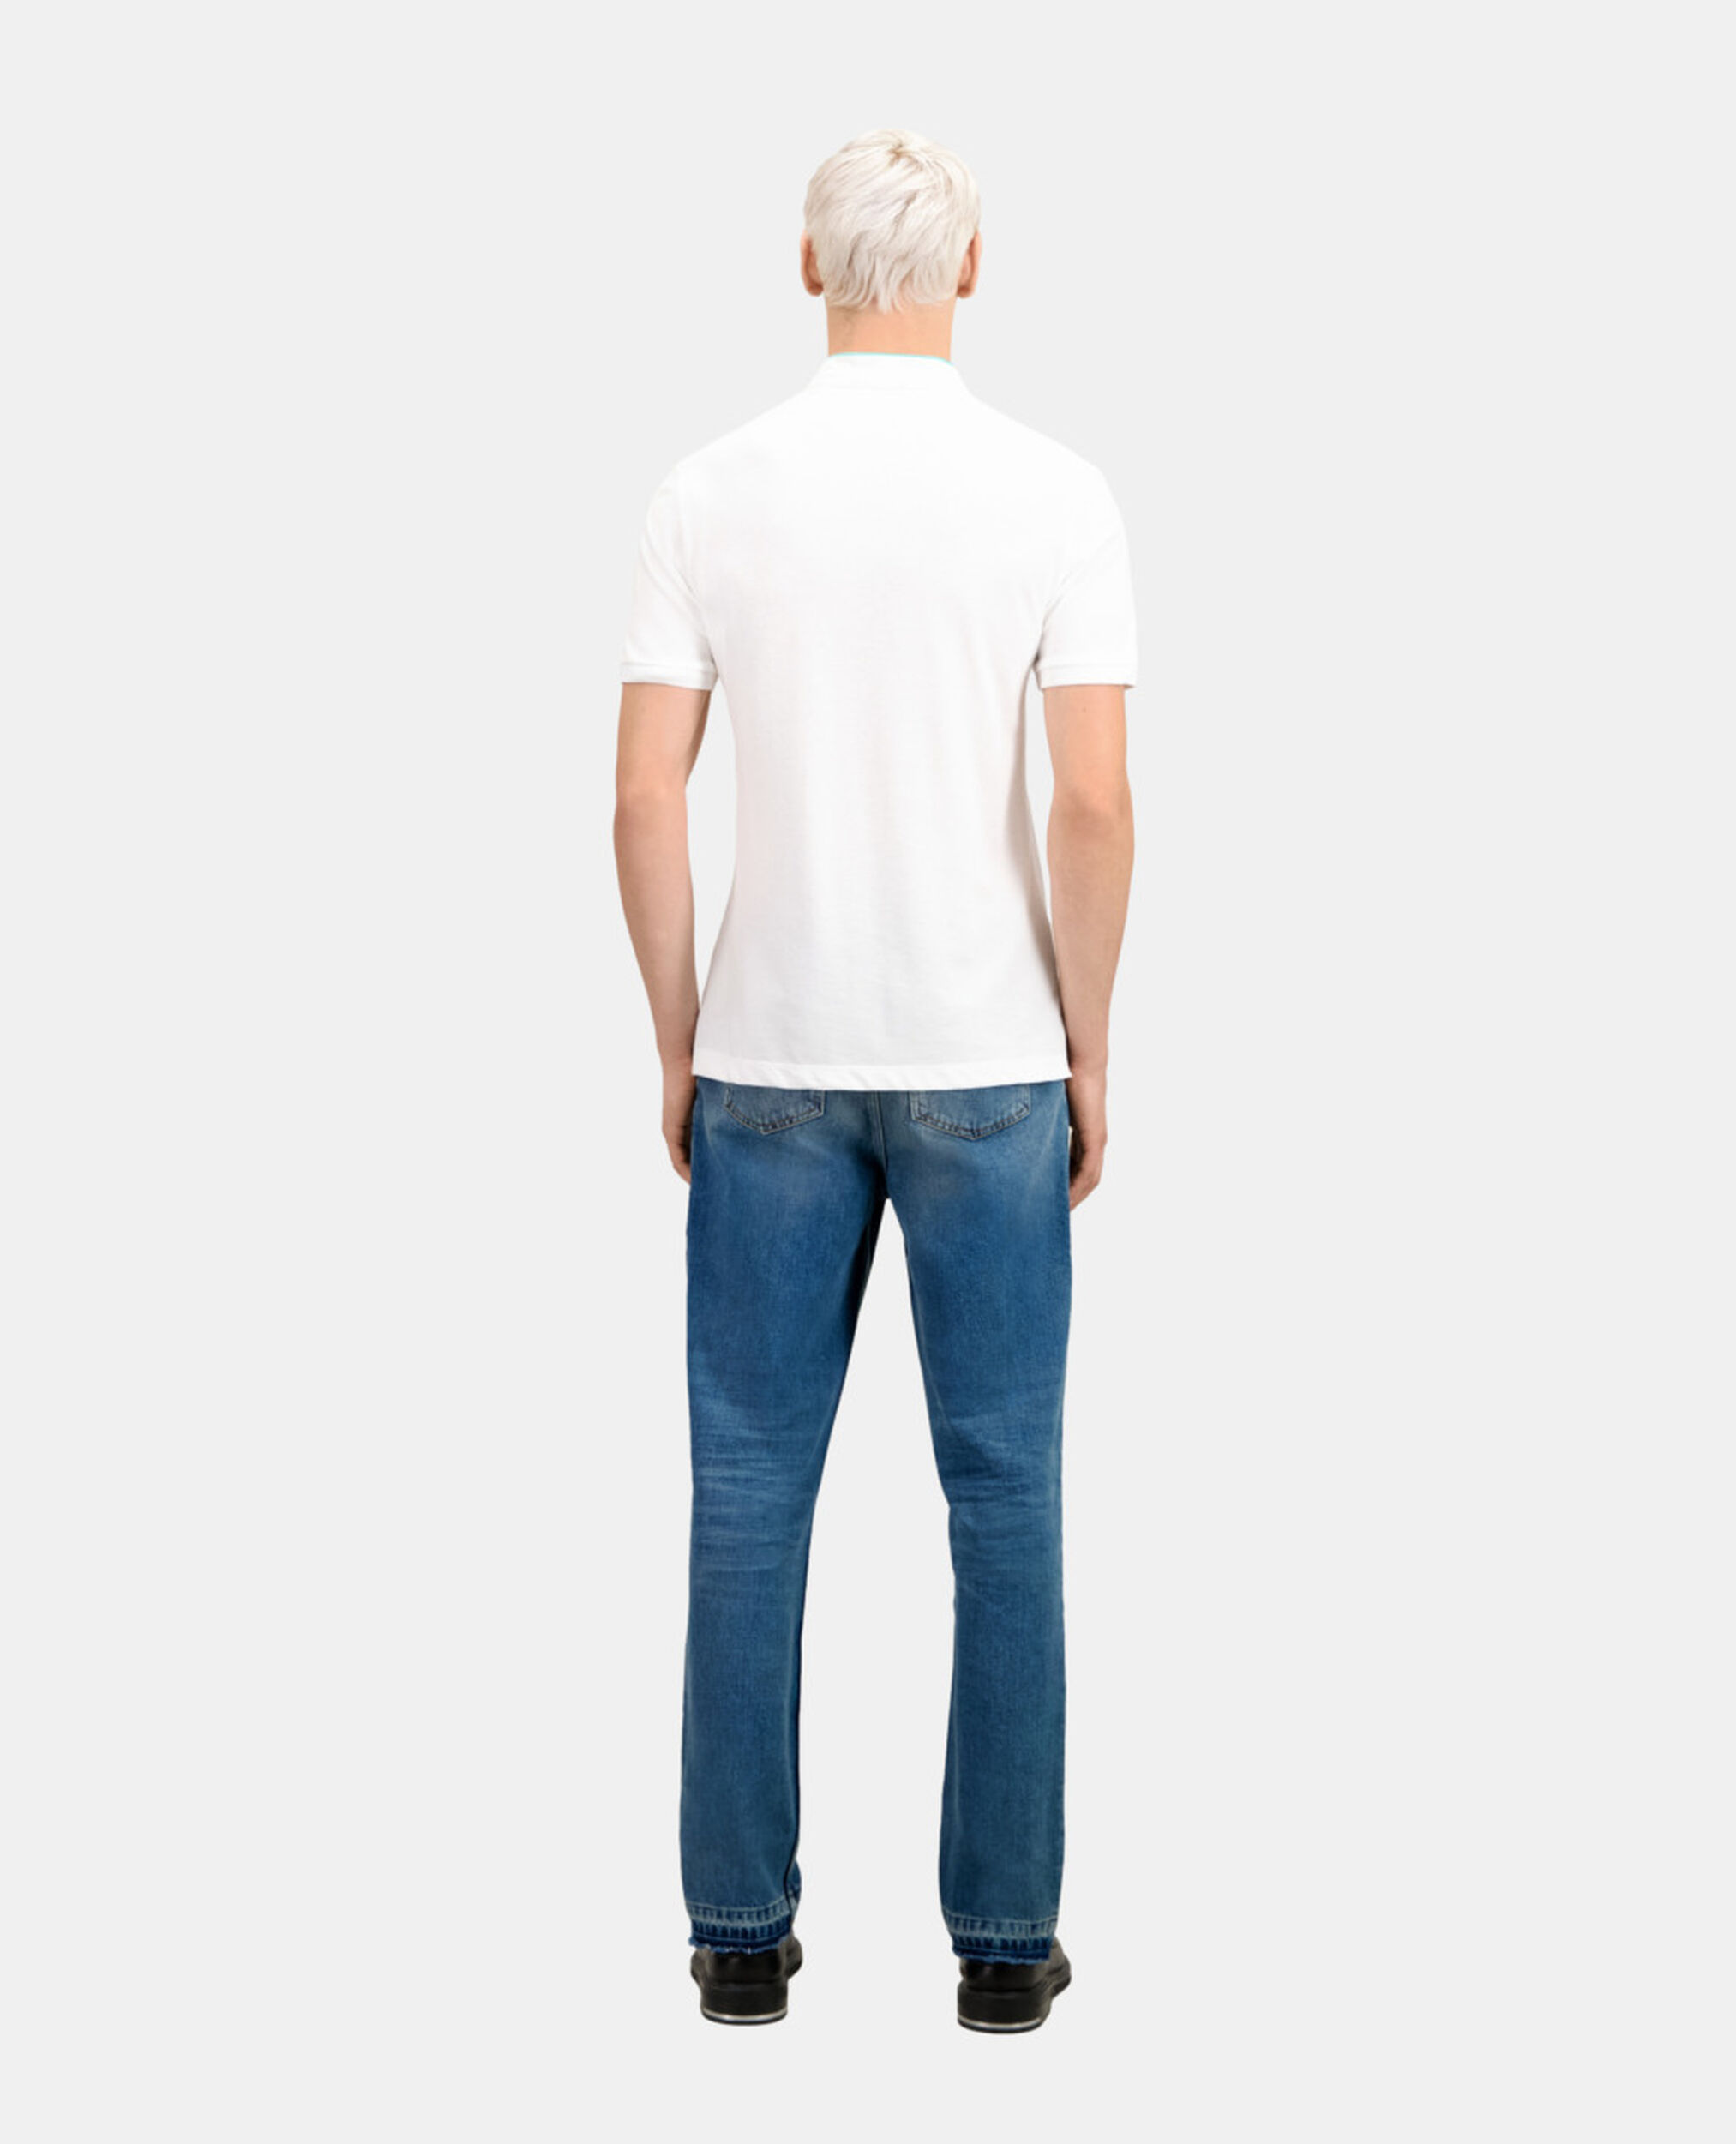 Polo blanc en coton, WHITE / DUCK BLUE, hi-res image number null